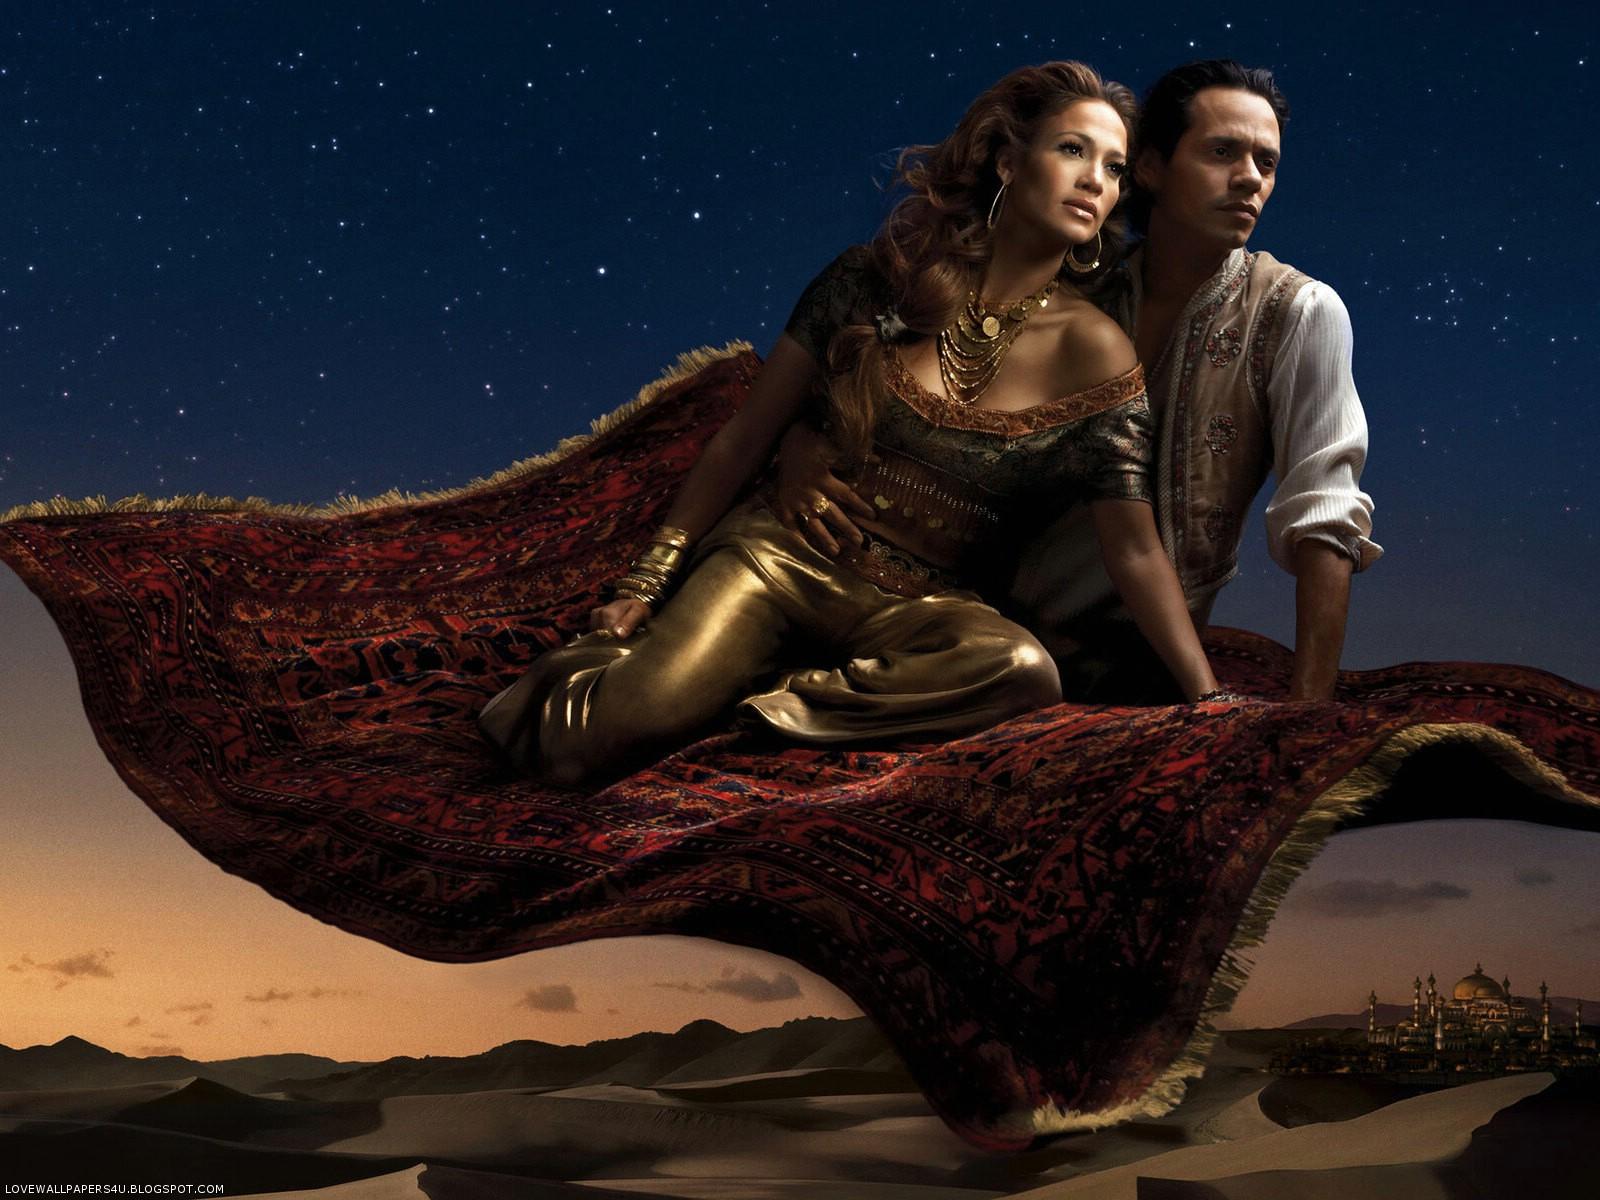 Arabian Nights Wallpaper Group , Download for free